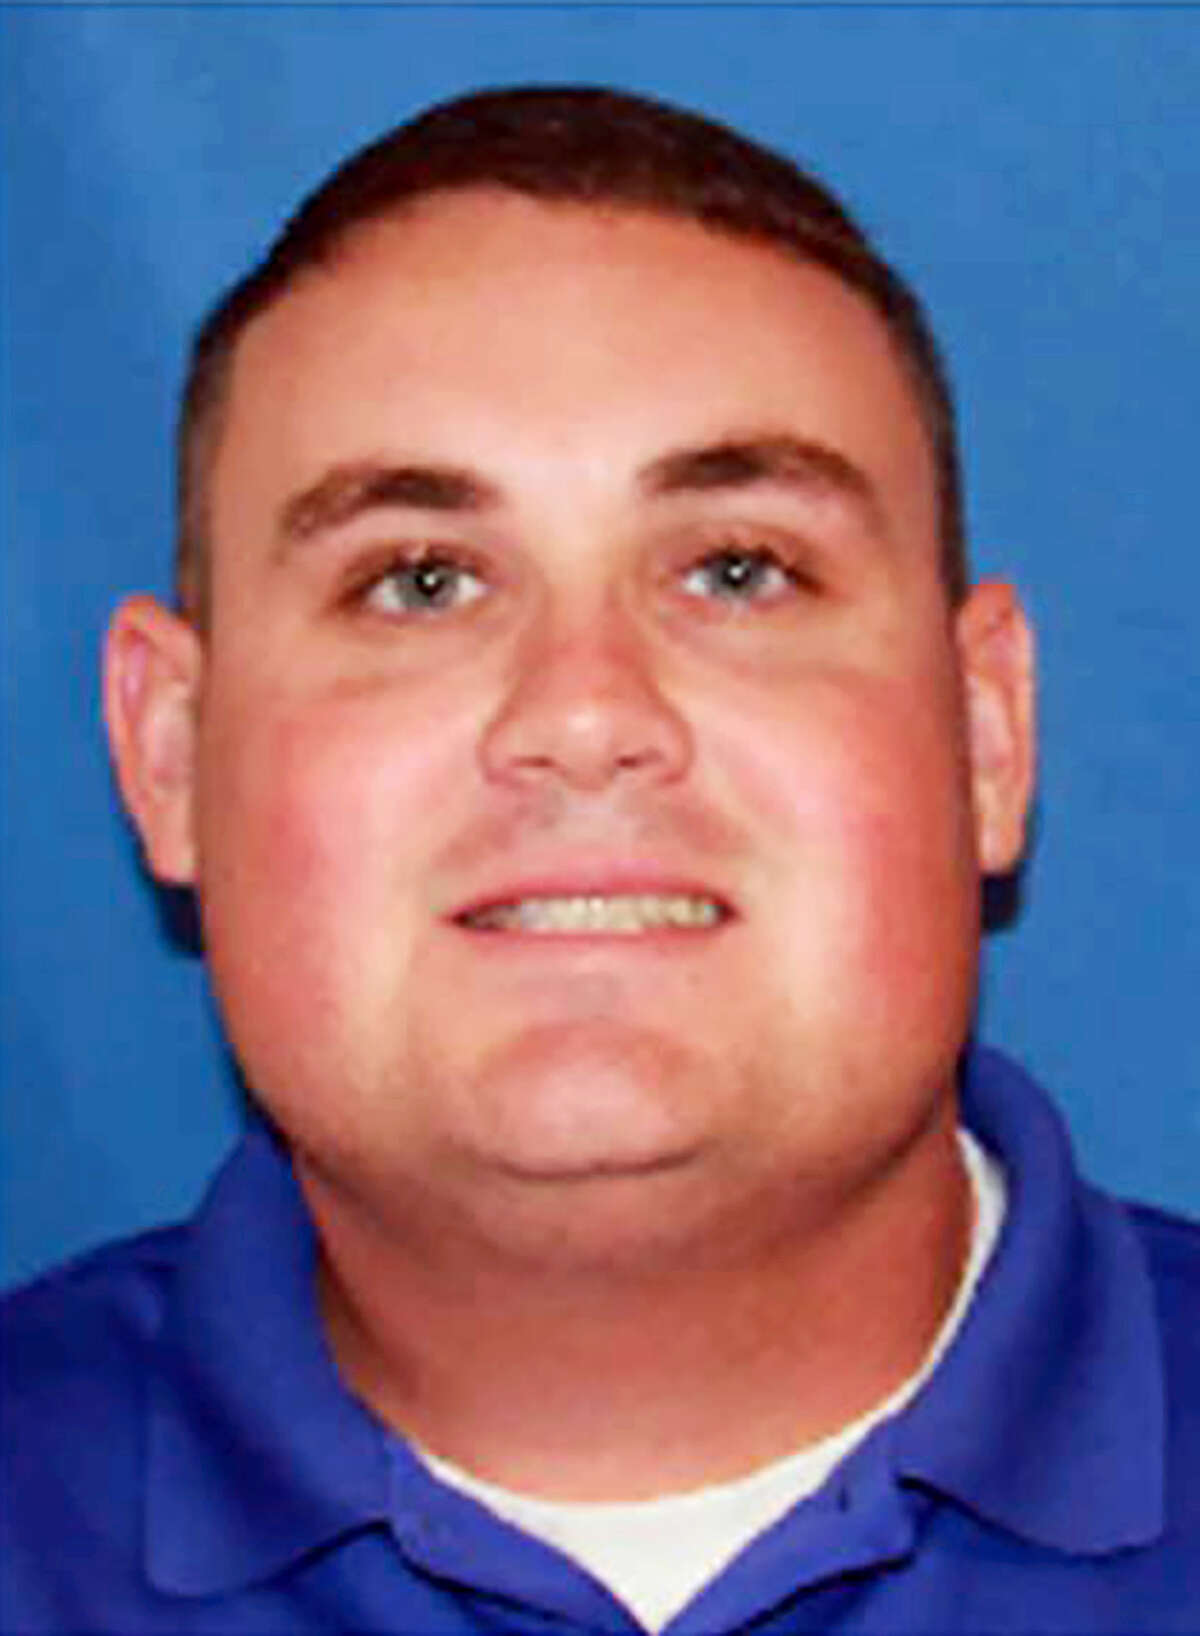 This undated image provided by Georgia Southwestern State University shows campus police officer Jody Smith. The manhunt for 32-year-old Minquell Lembrick ended a Thursday, Dec. 8, 2016, they day after the alleged gunman killed Americus police Officer Nicholas Smarr and Officer Jody Smith of Georgia Southwestern State University. Both officers were shot as they responded to a domestic disturbance call in Americus, a rural city 130 miles south of Atlanta.